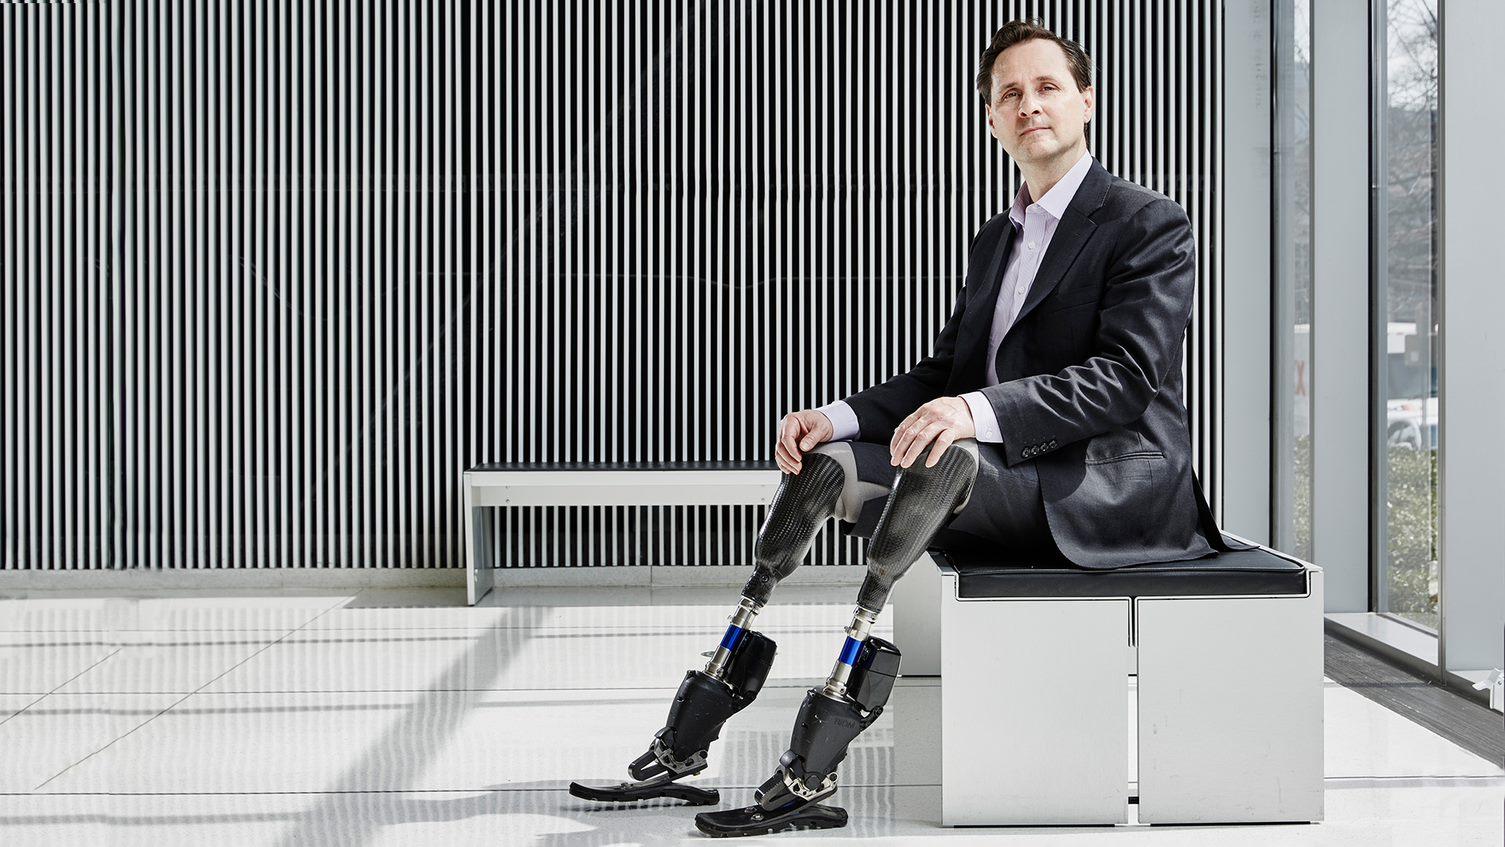 Inventor with biomechatronic legs sitting 